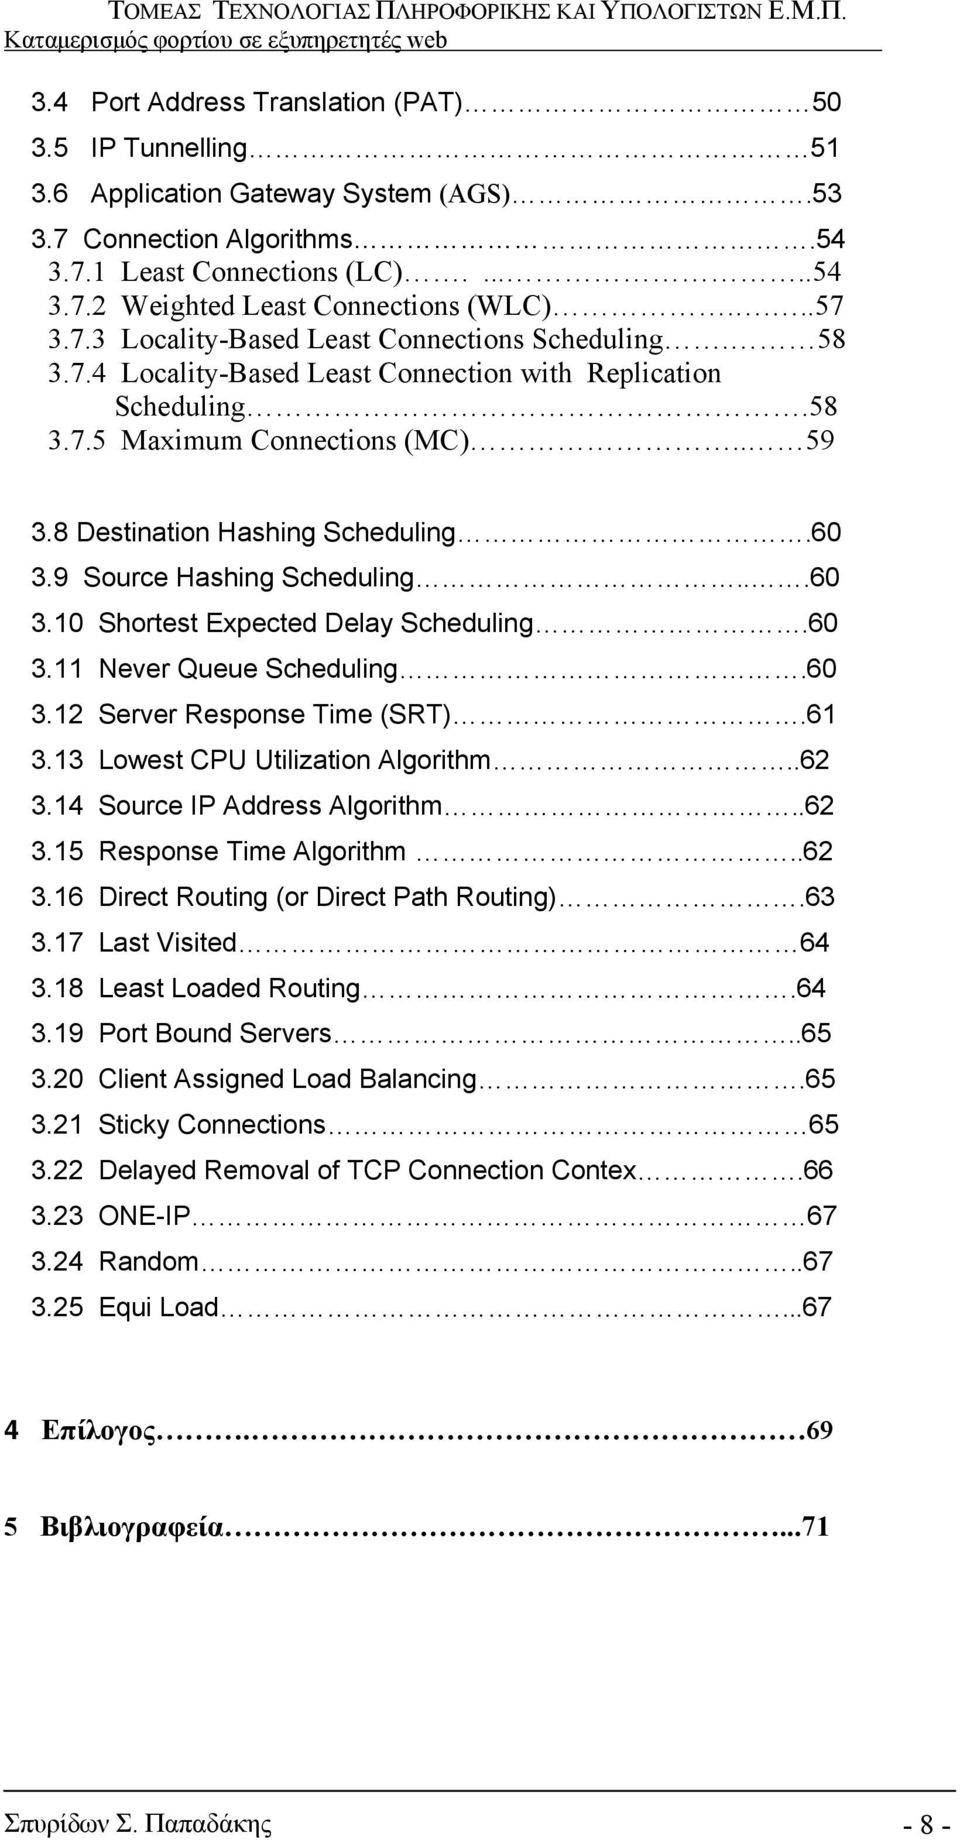 60 3.9 Source Hashing Scheduling...60 3.10 Shortest Expected Delay Scheduling.60 3.11 Never Queue Scheduling.60 3.12 Server Response Time (SRT).61 3.13 Lowest CPU Utilization Algorithm..62 3.